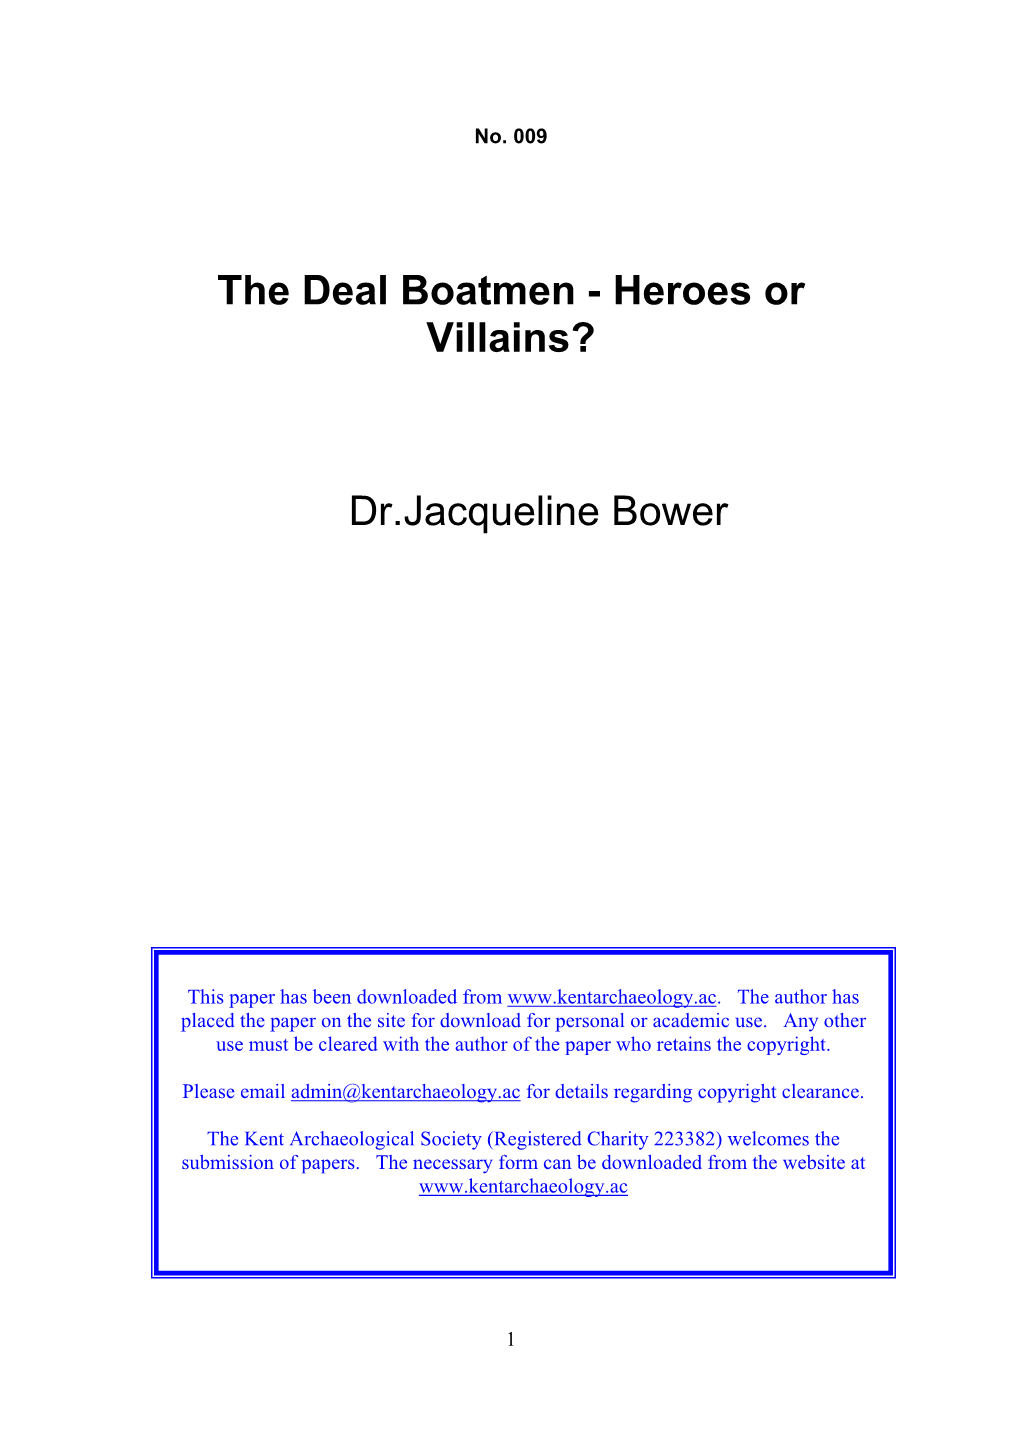 The Deal Boatmen - Heroes Or Villains?